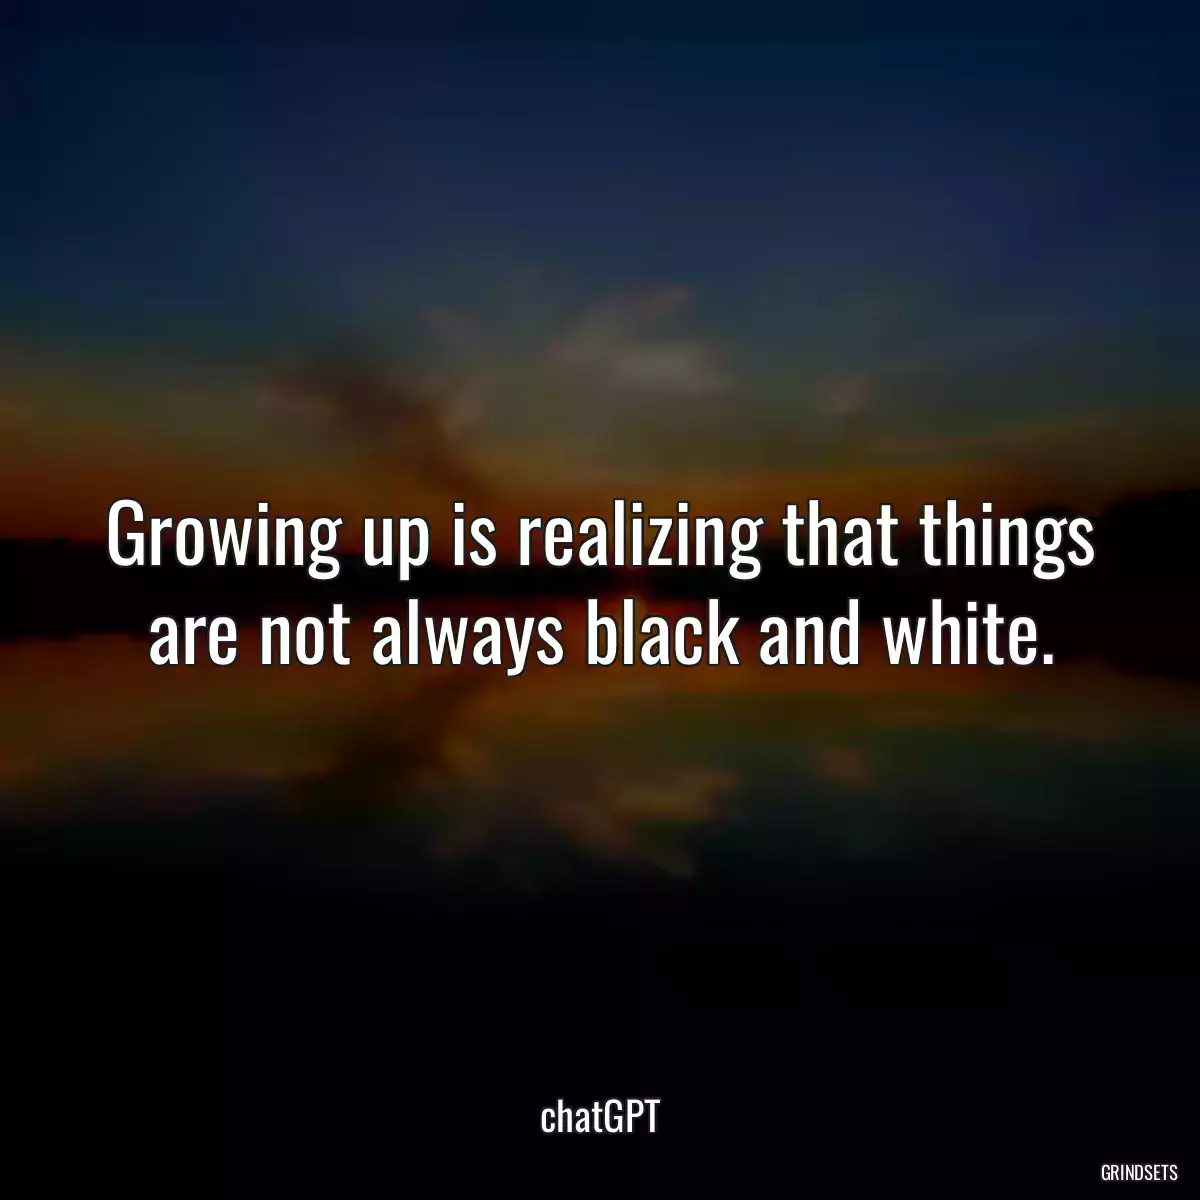 Growing up is realizing that things are not always black and white.